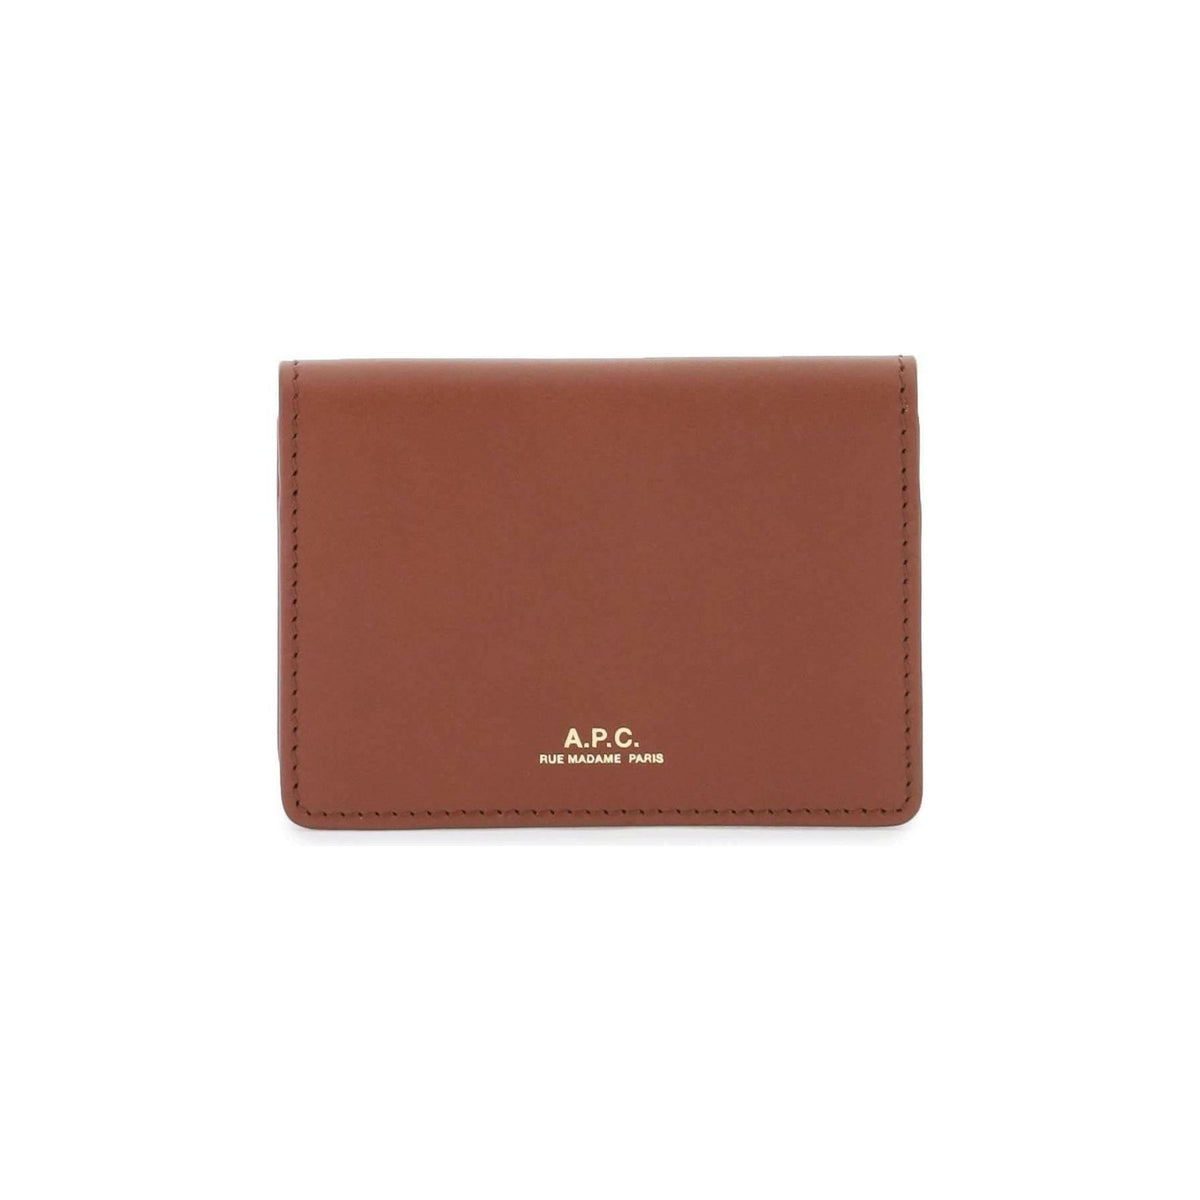 A.P.C. Leather Stefan Card Holder